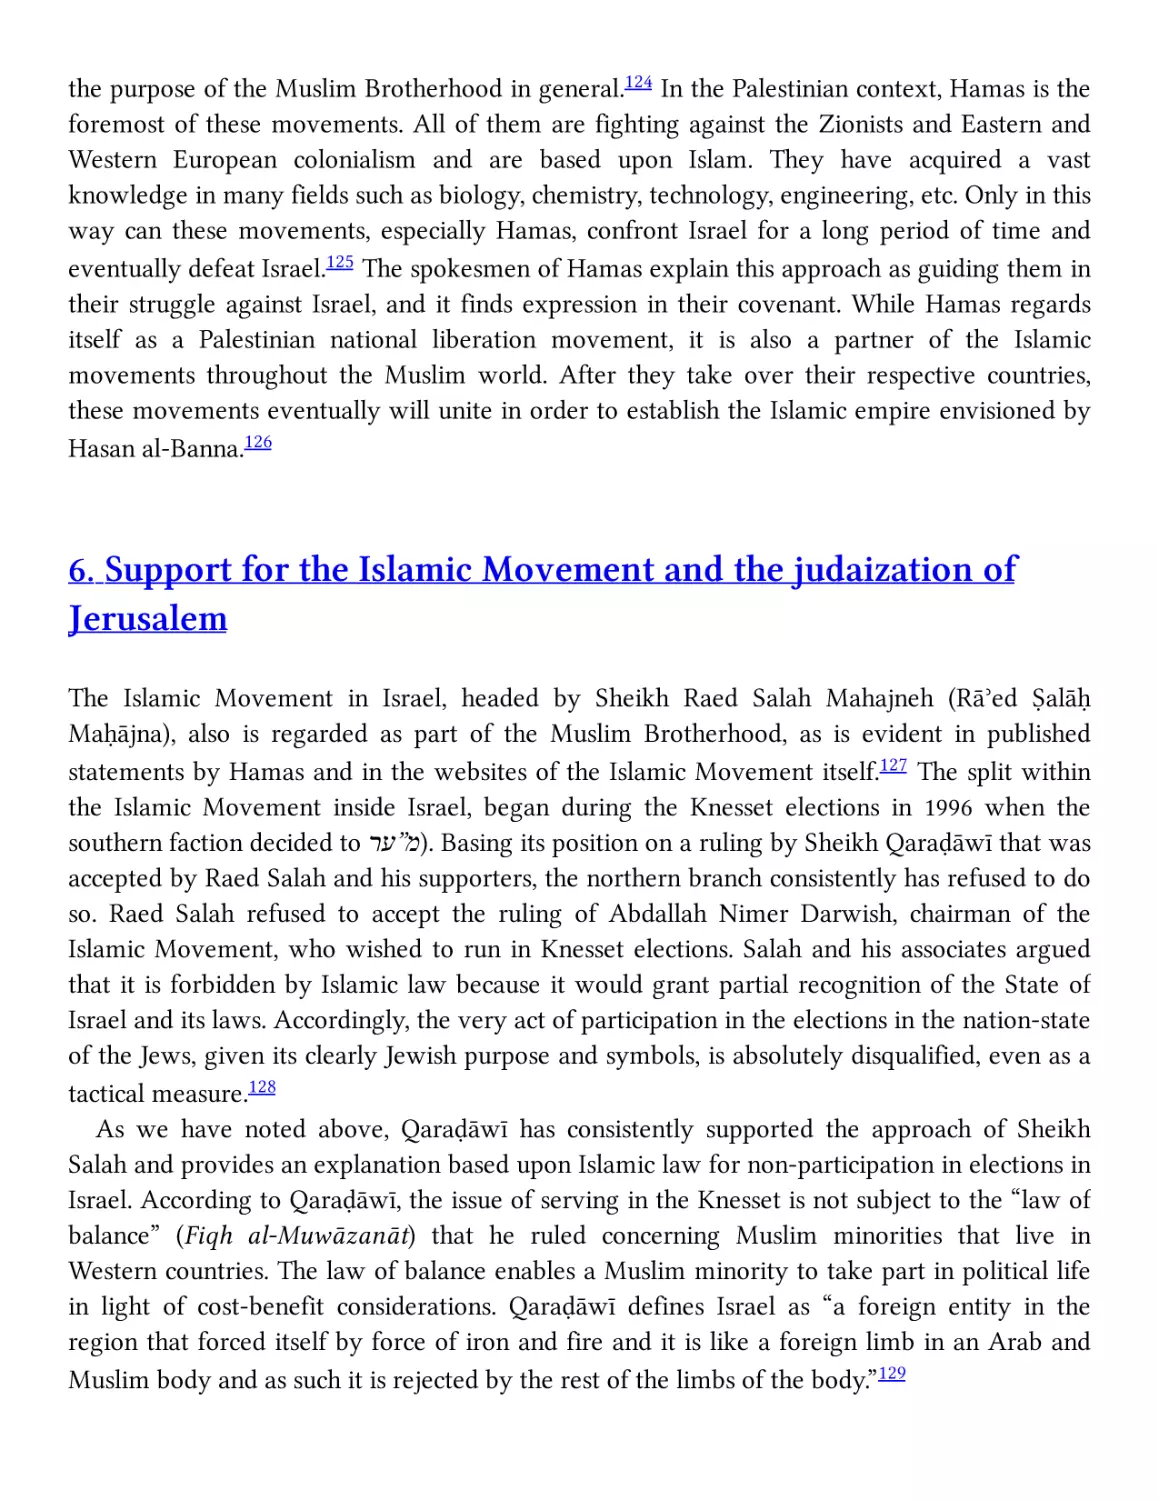 6. Support for the Islamic Movement and the judaization of Jerusalem